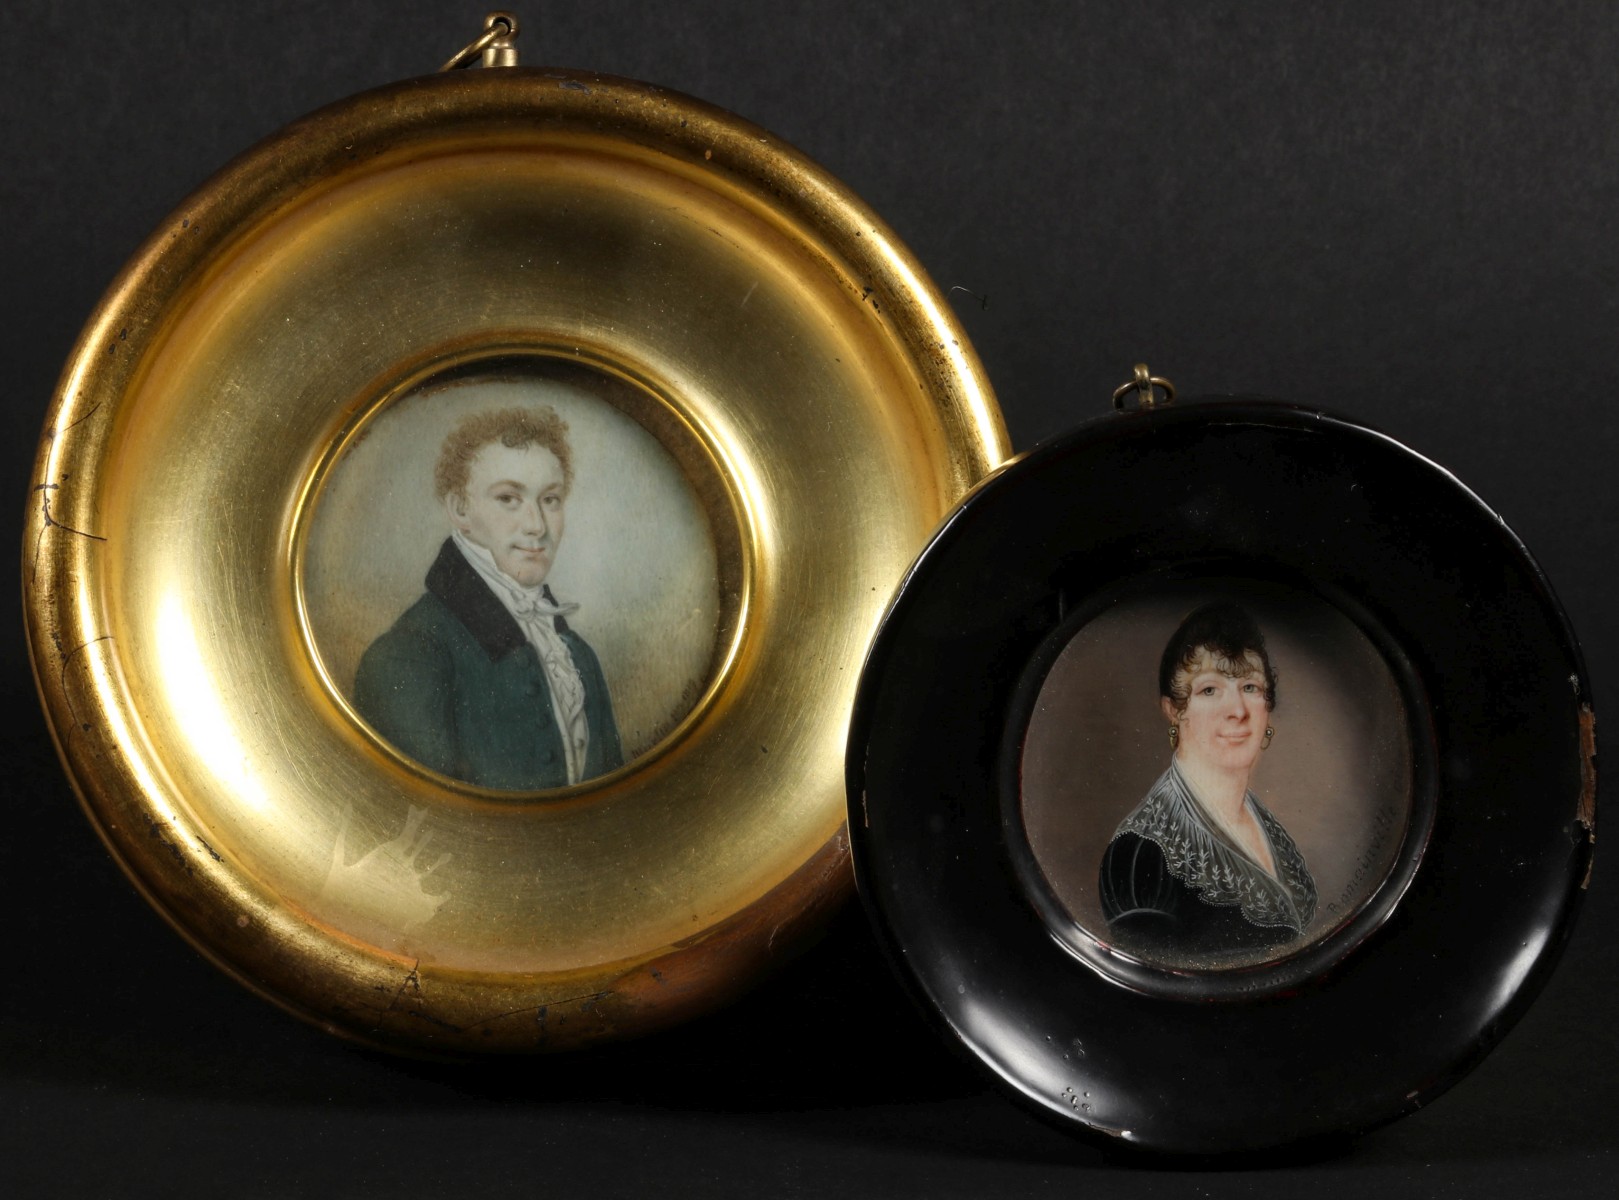 TWO 19TH CENTURY HAND PAINTED MINIATURE PORTRAITS